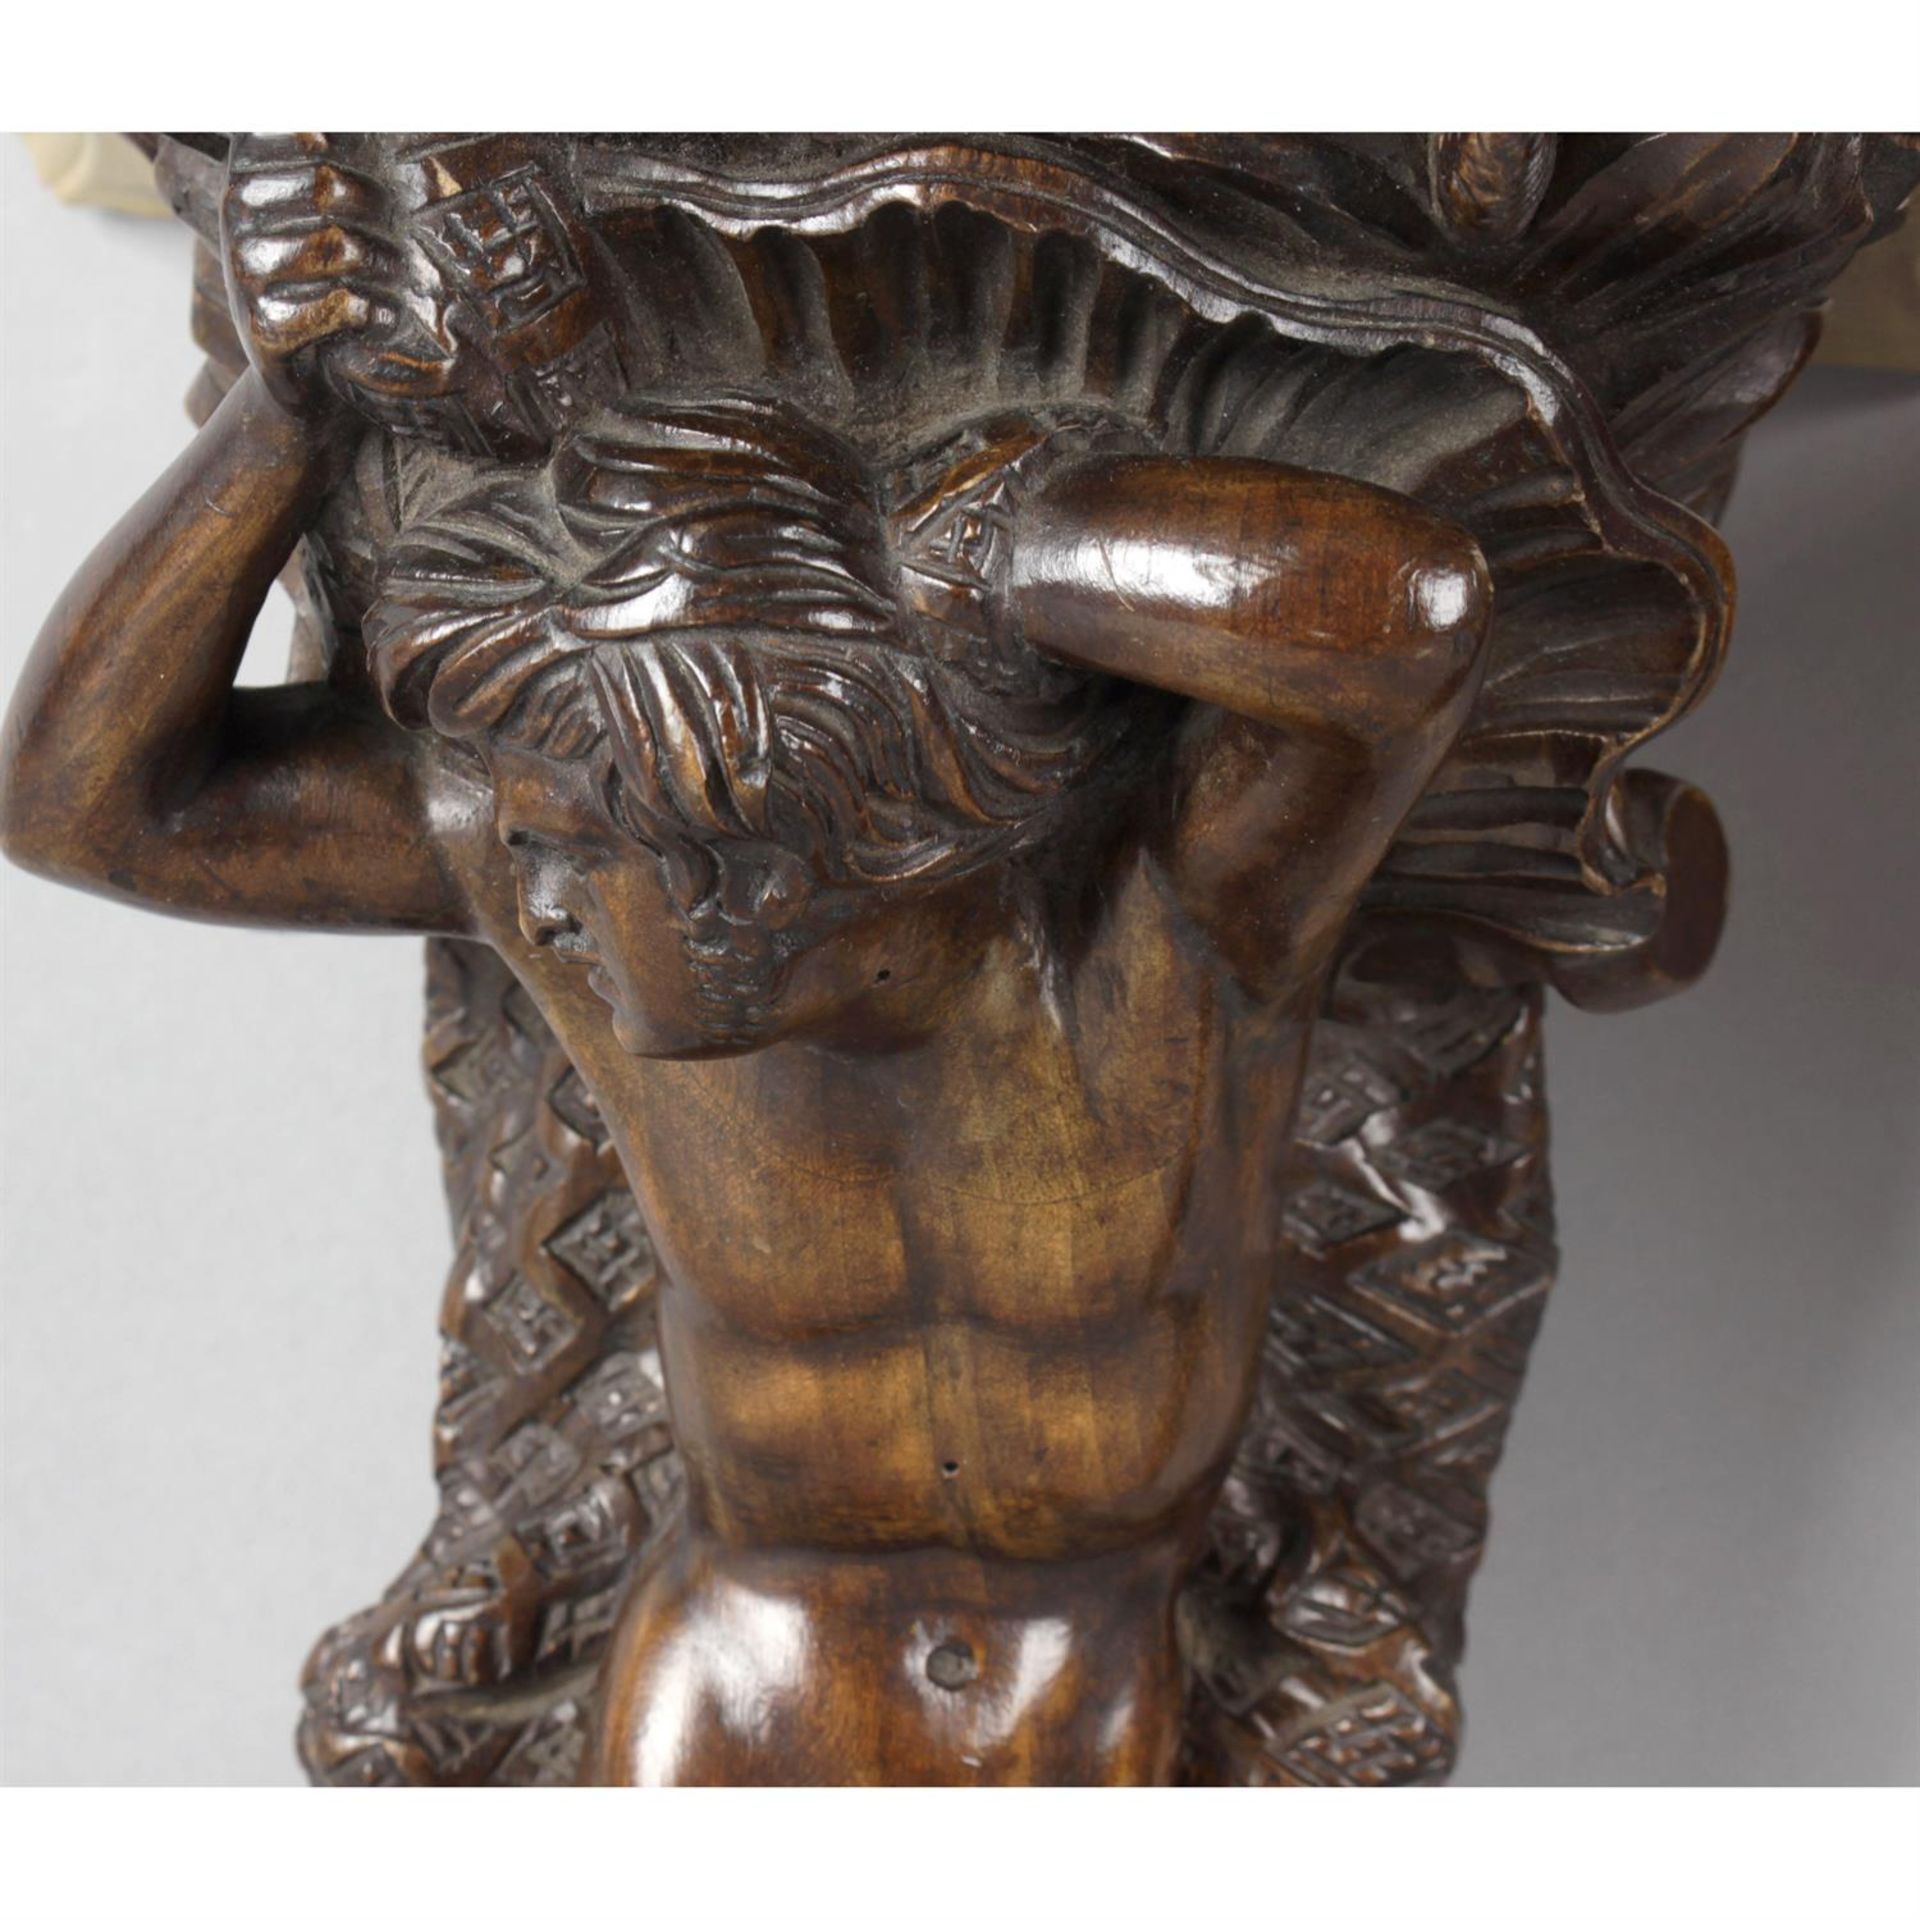 A pair of 19th century carved wooden corbels modelled as a mermaid and merman. - Image 3 of 4